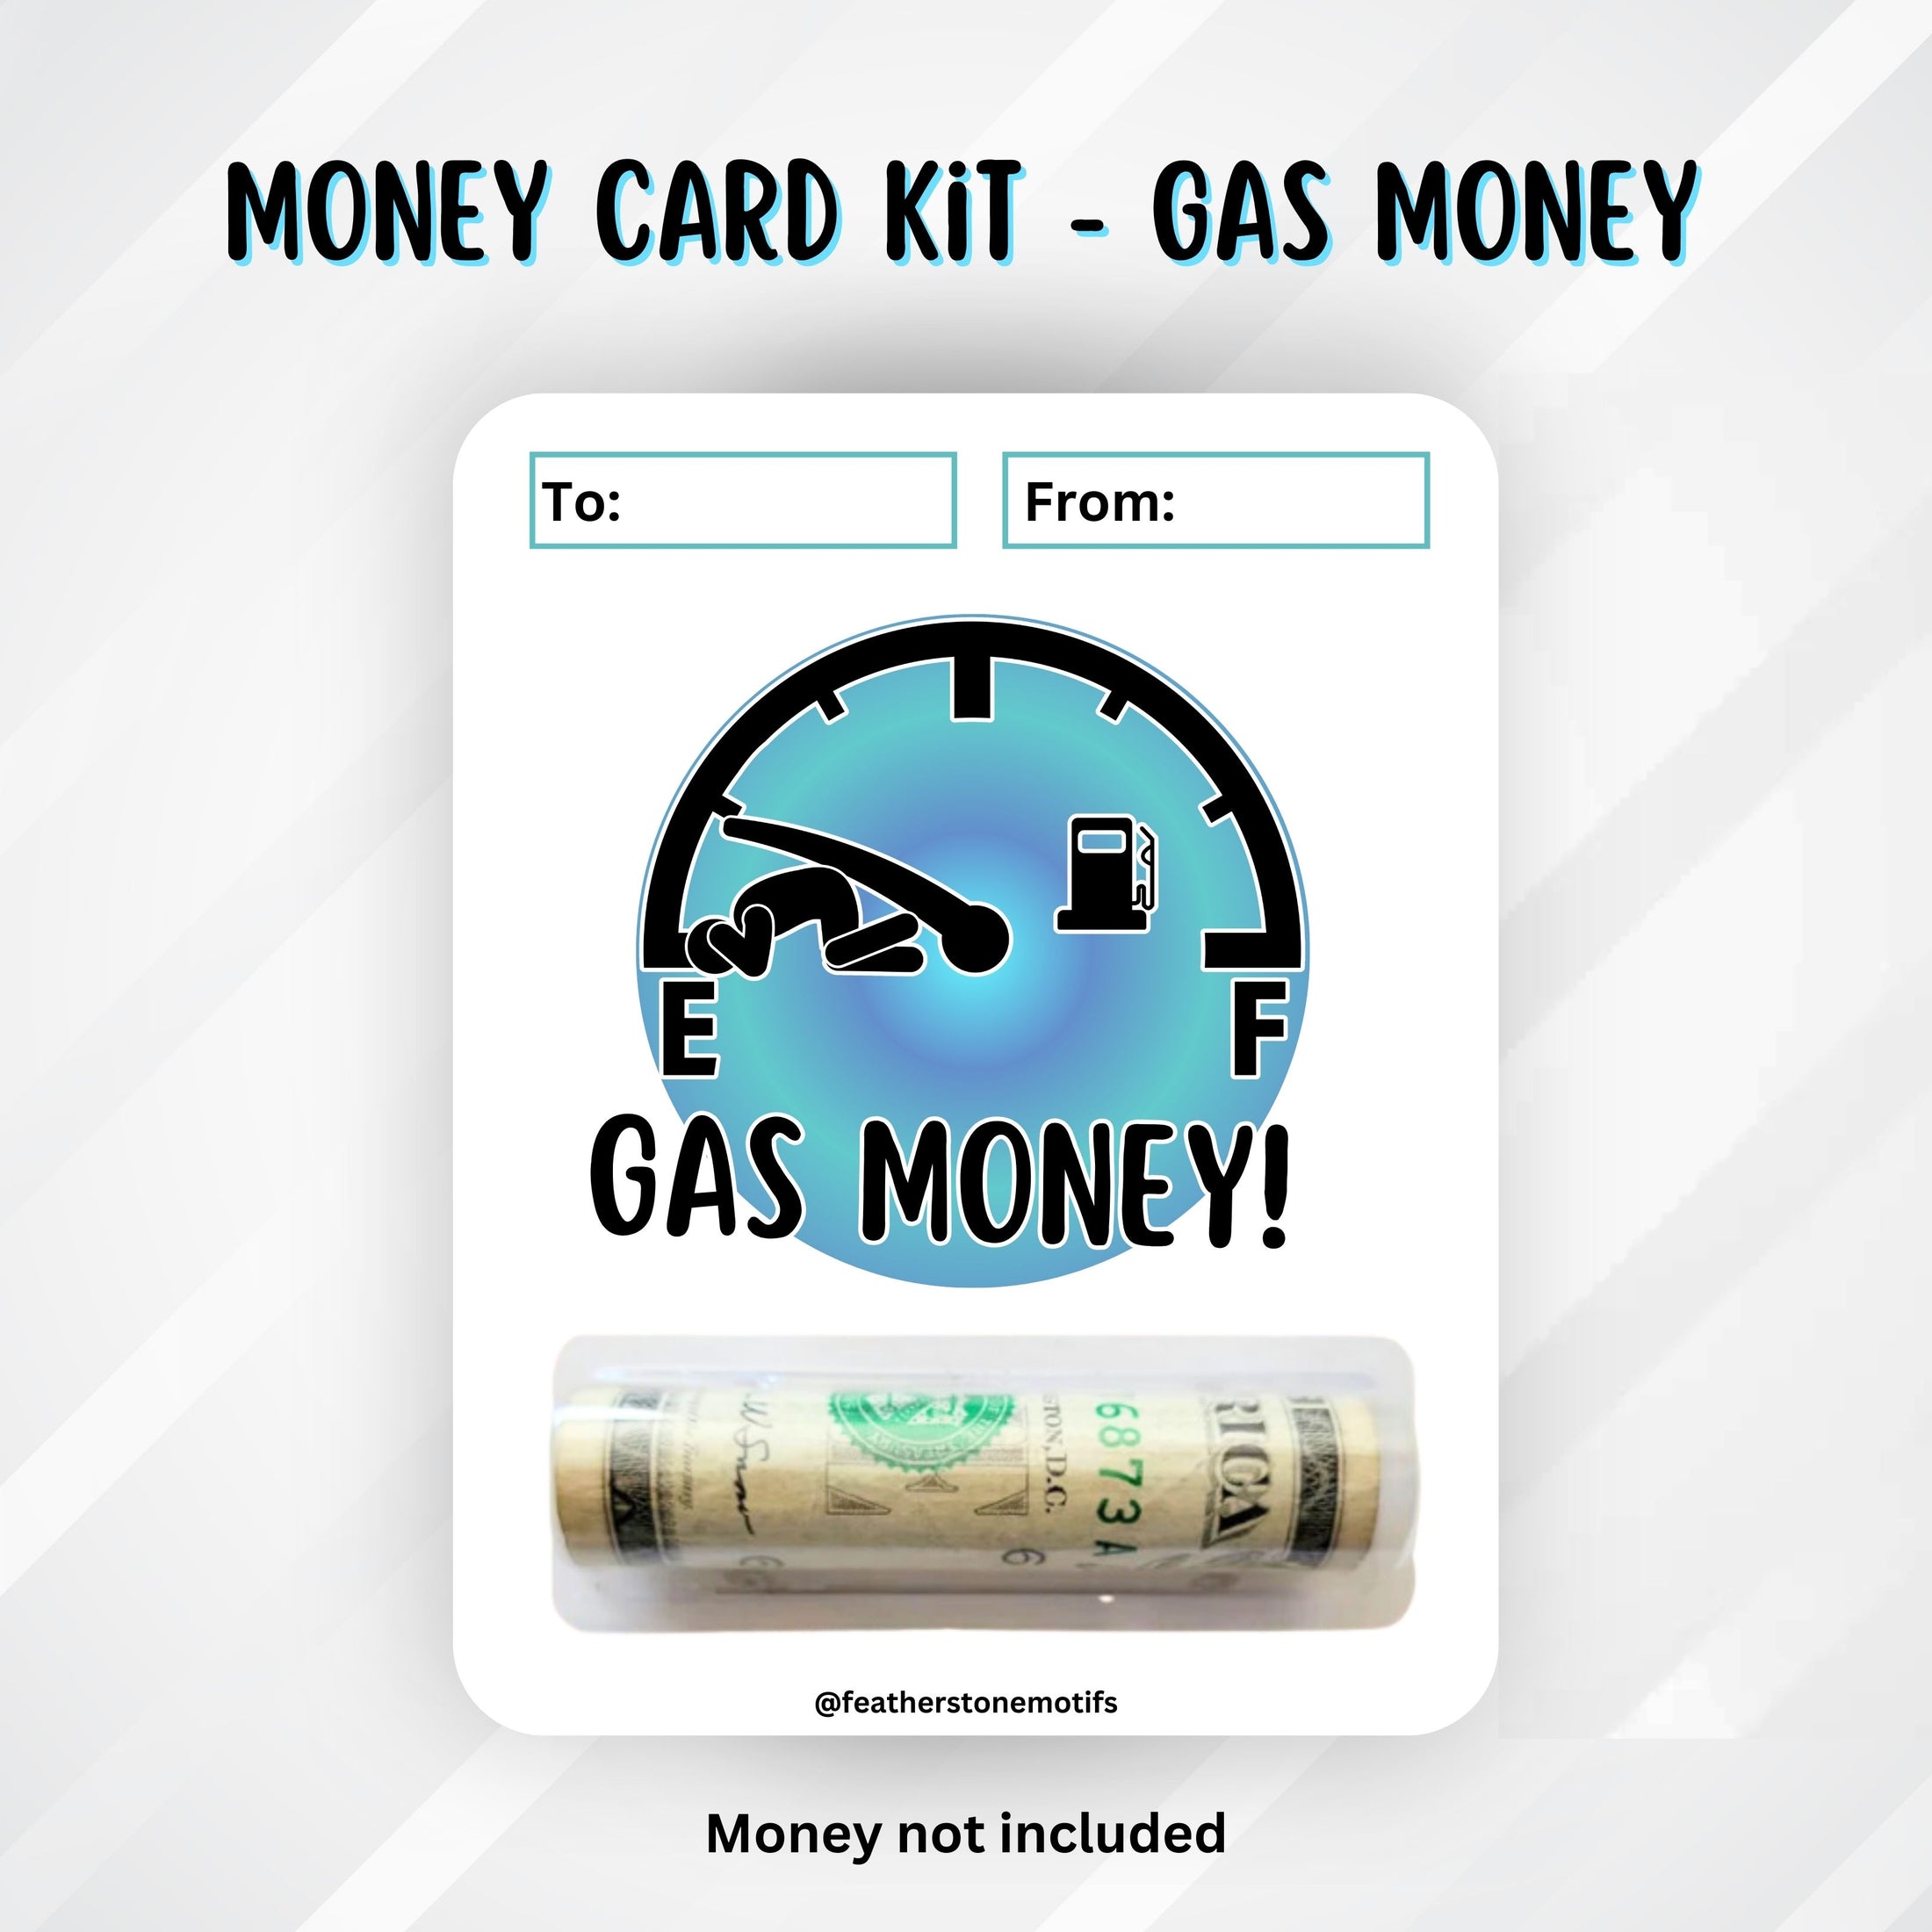 This image shows the money tube attached to the Gas Money 1 Money Card.